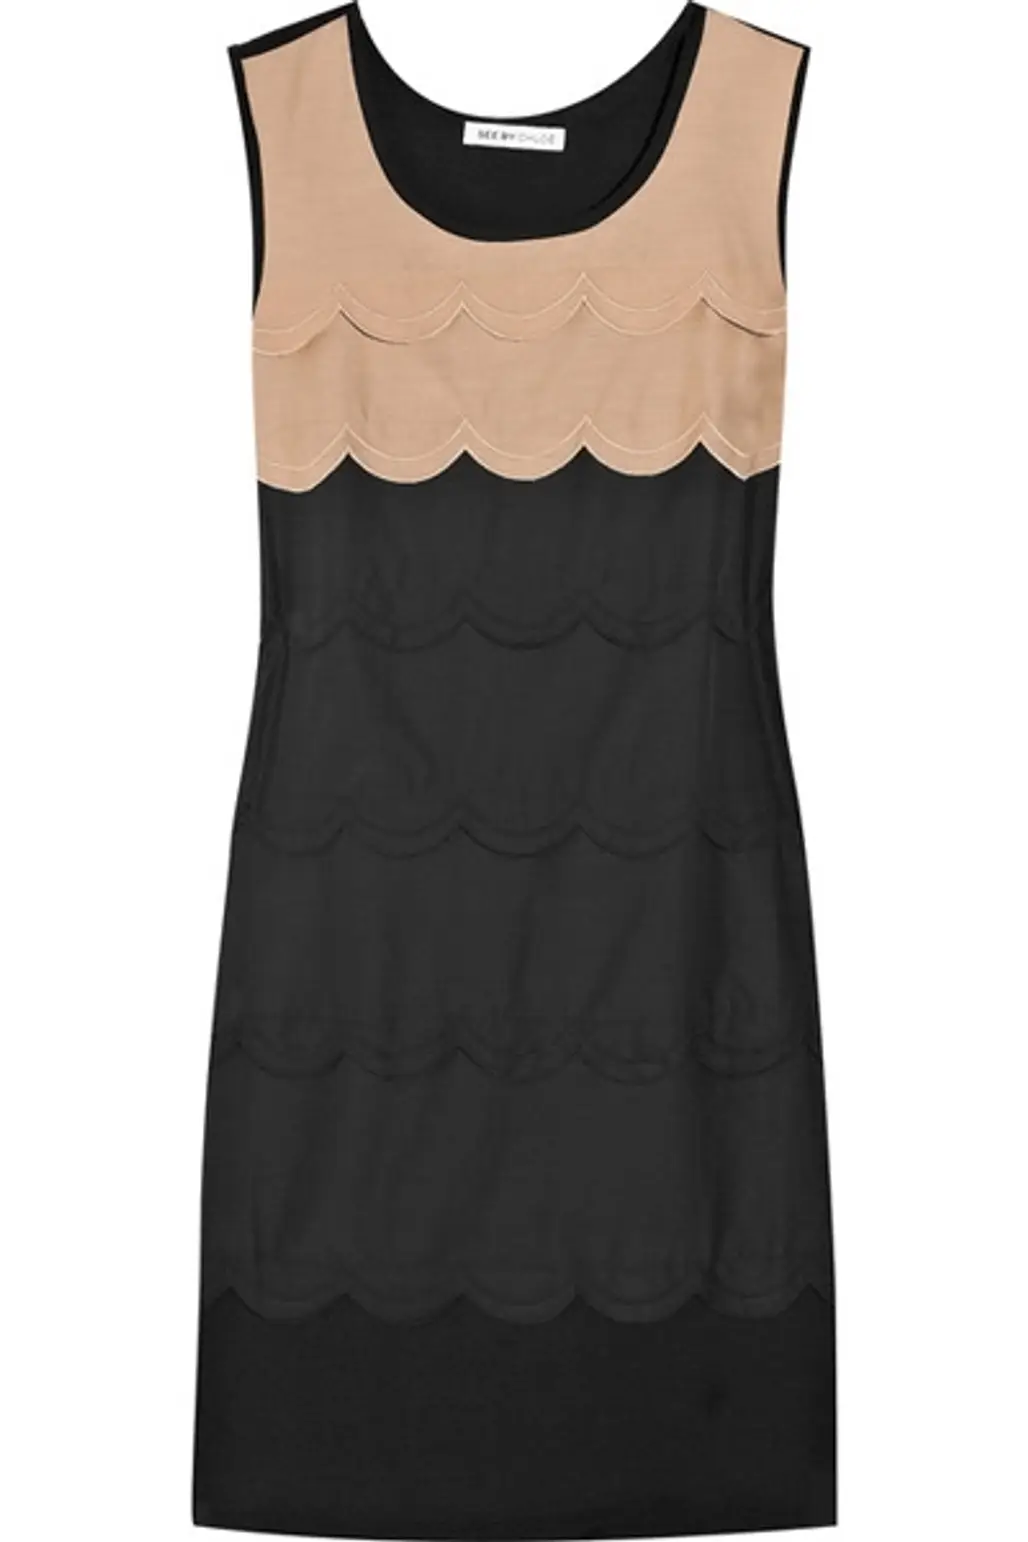 See by Chloe Scalloped Cotton and Silk Blend Jersey Dress